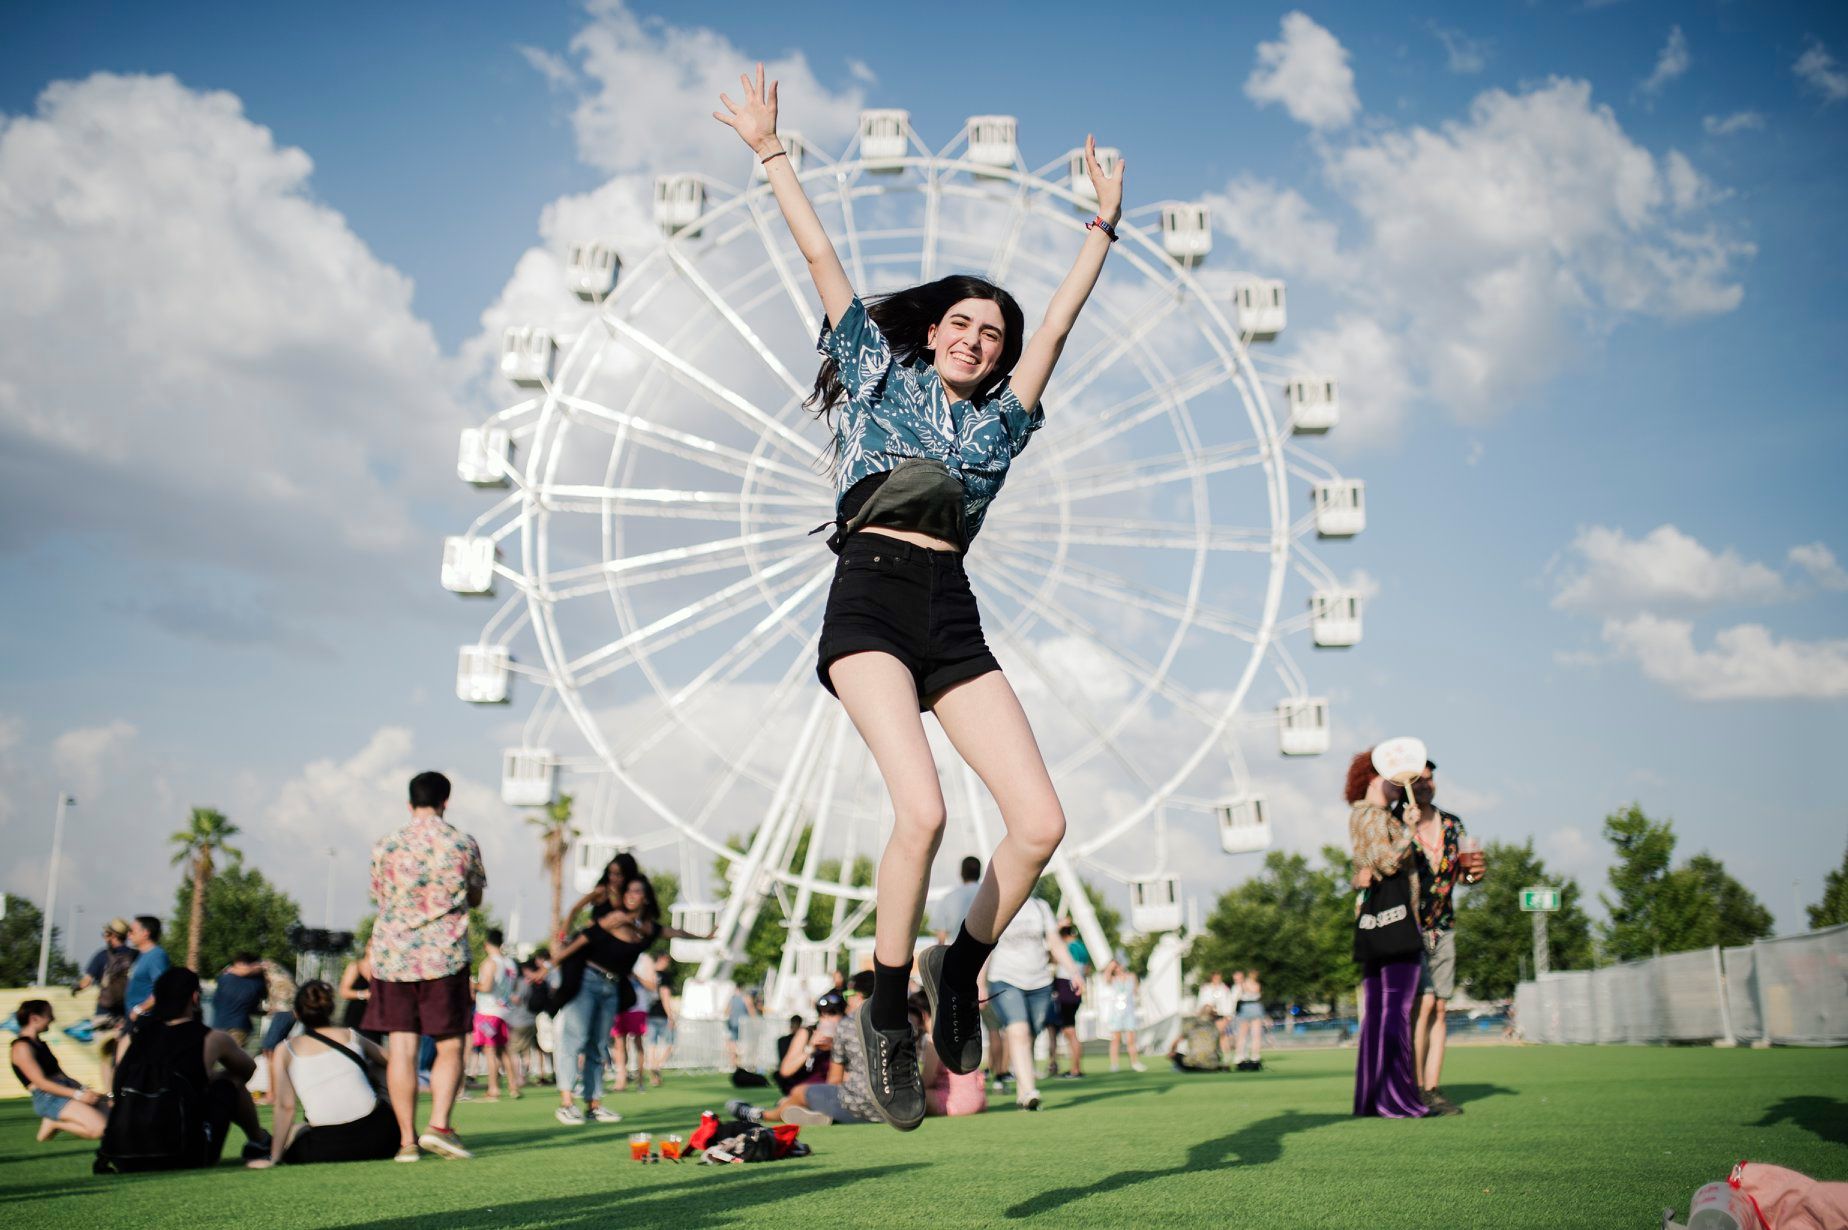 Girl jumping in front of ferris wheel